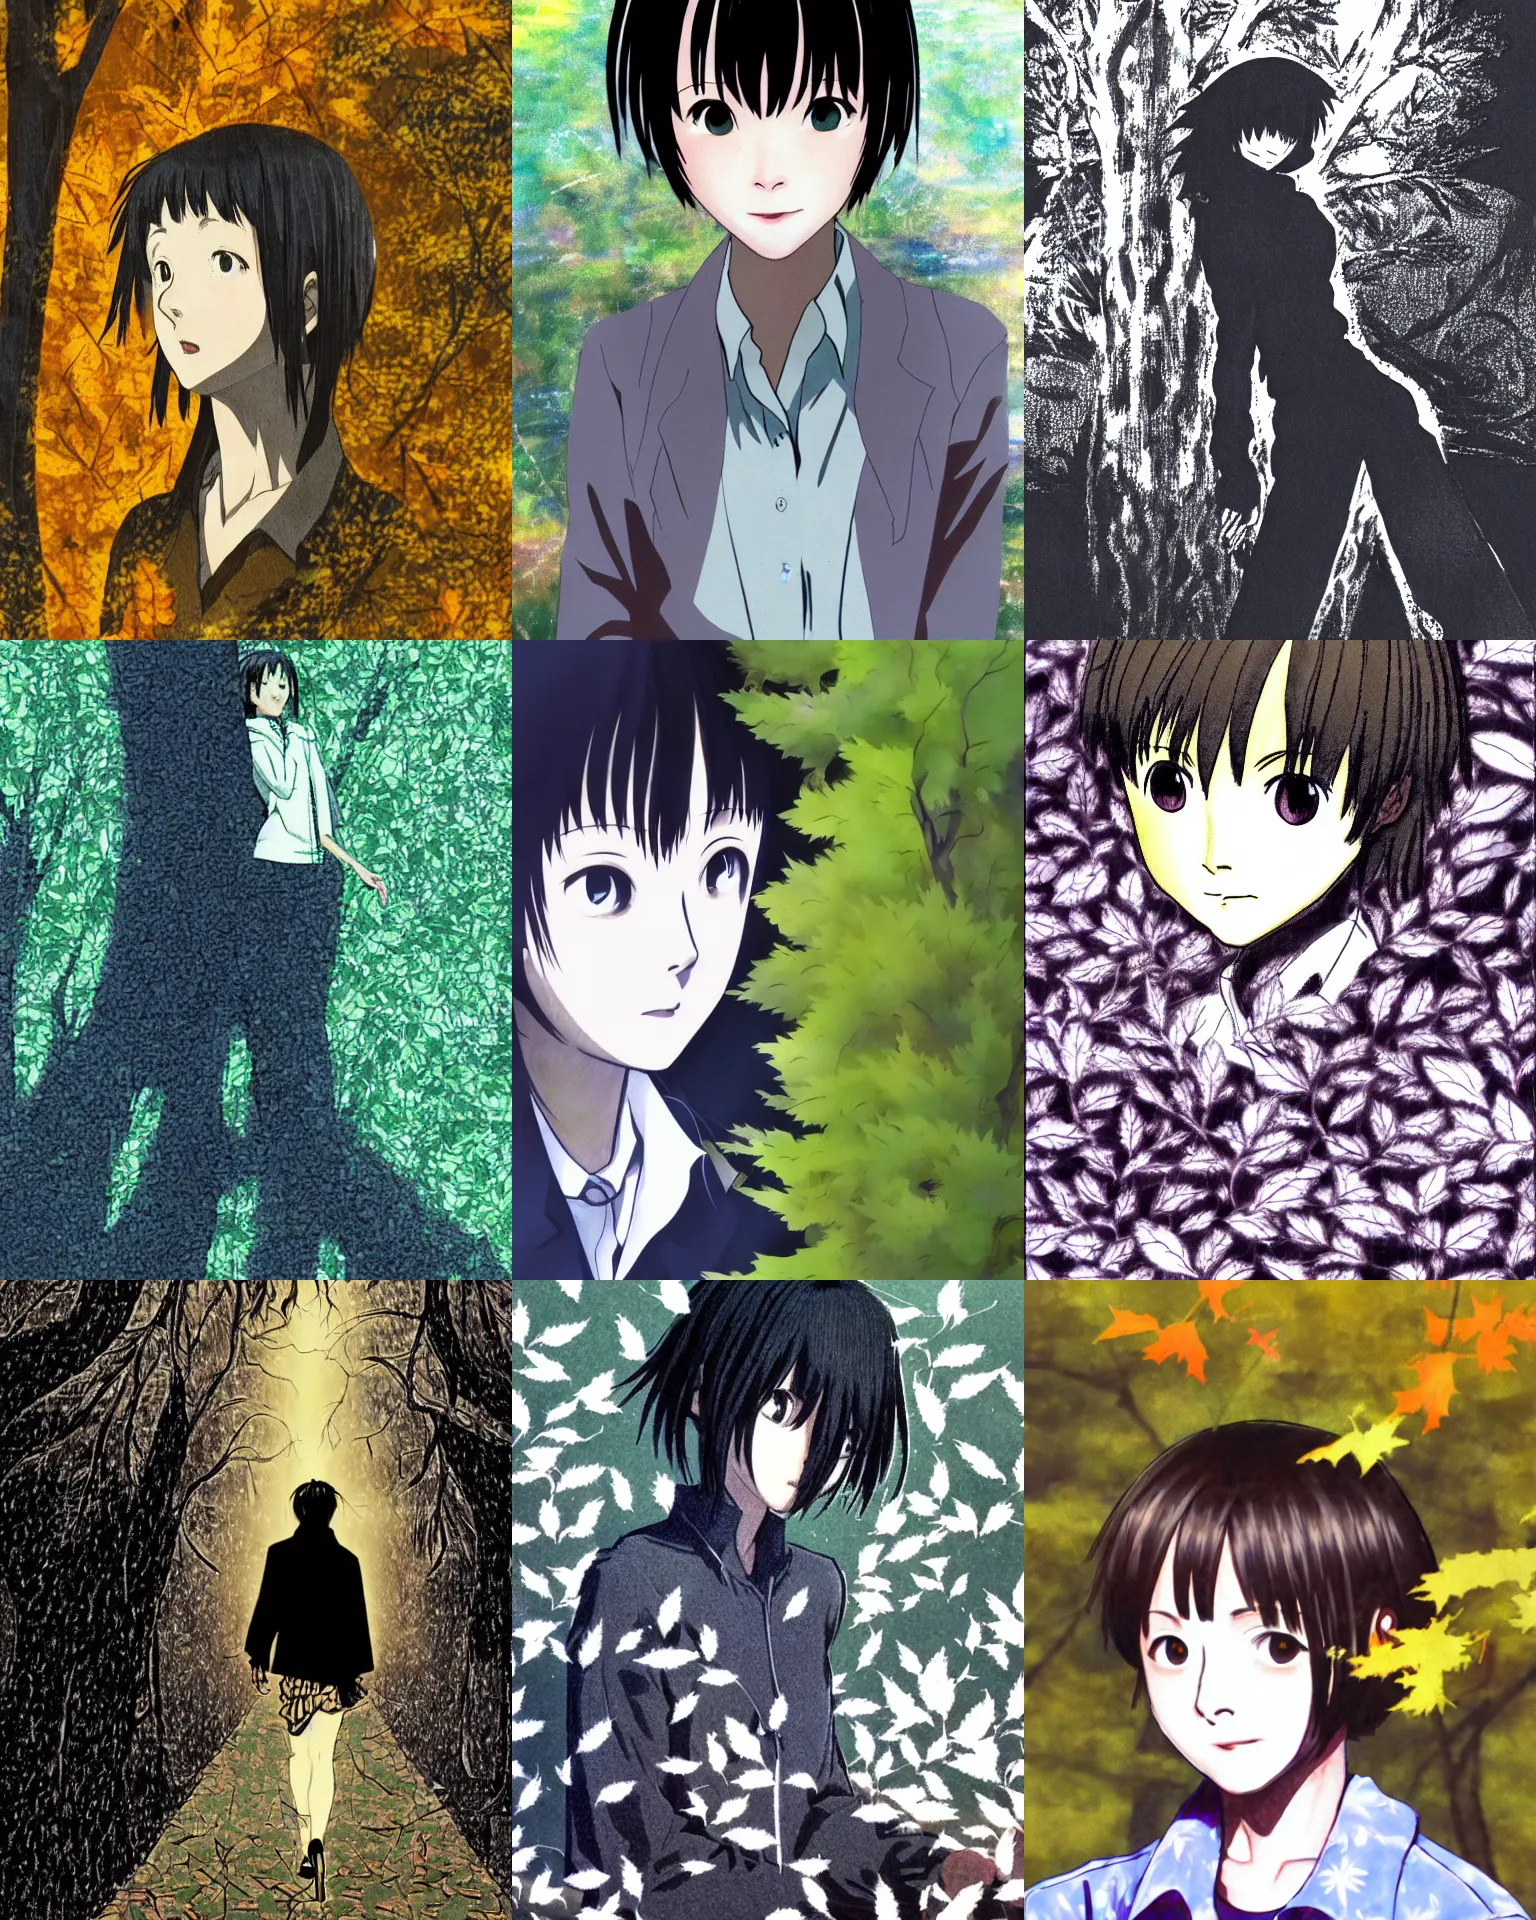 Prompt: lain iwakura drawn in smears on a phone screen illuminated by sunlight shining through tree leaves